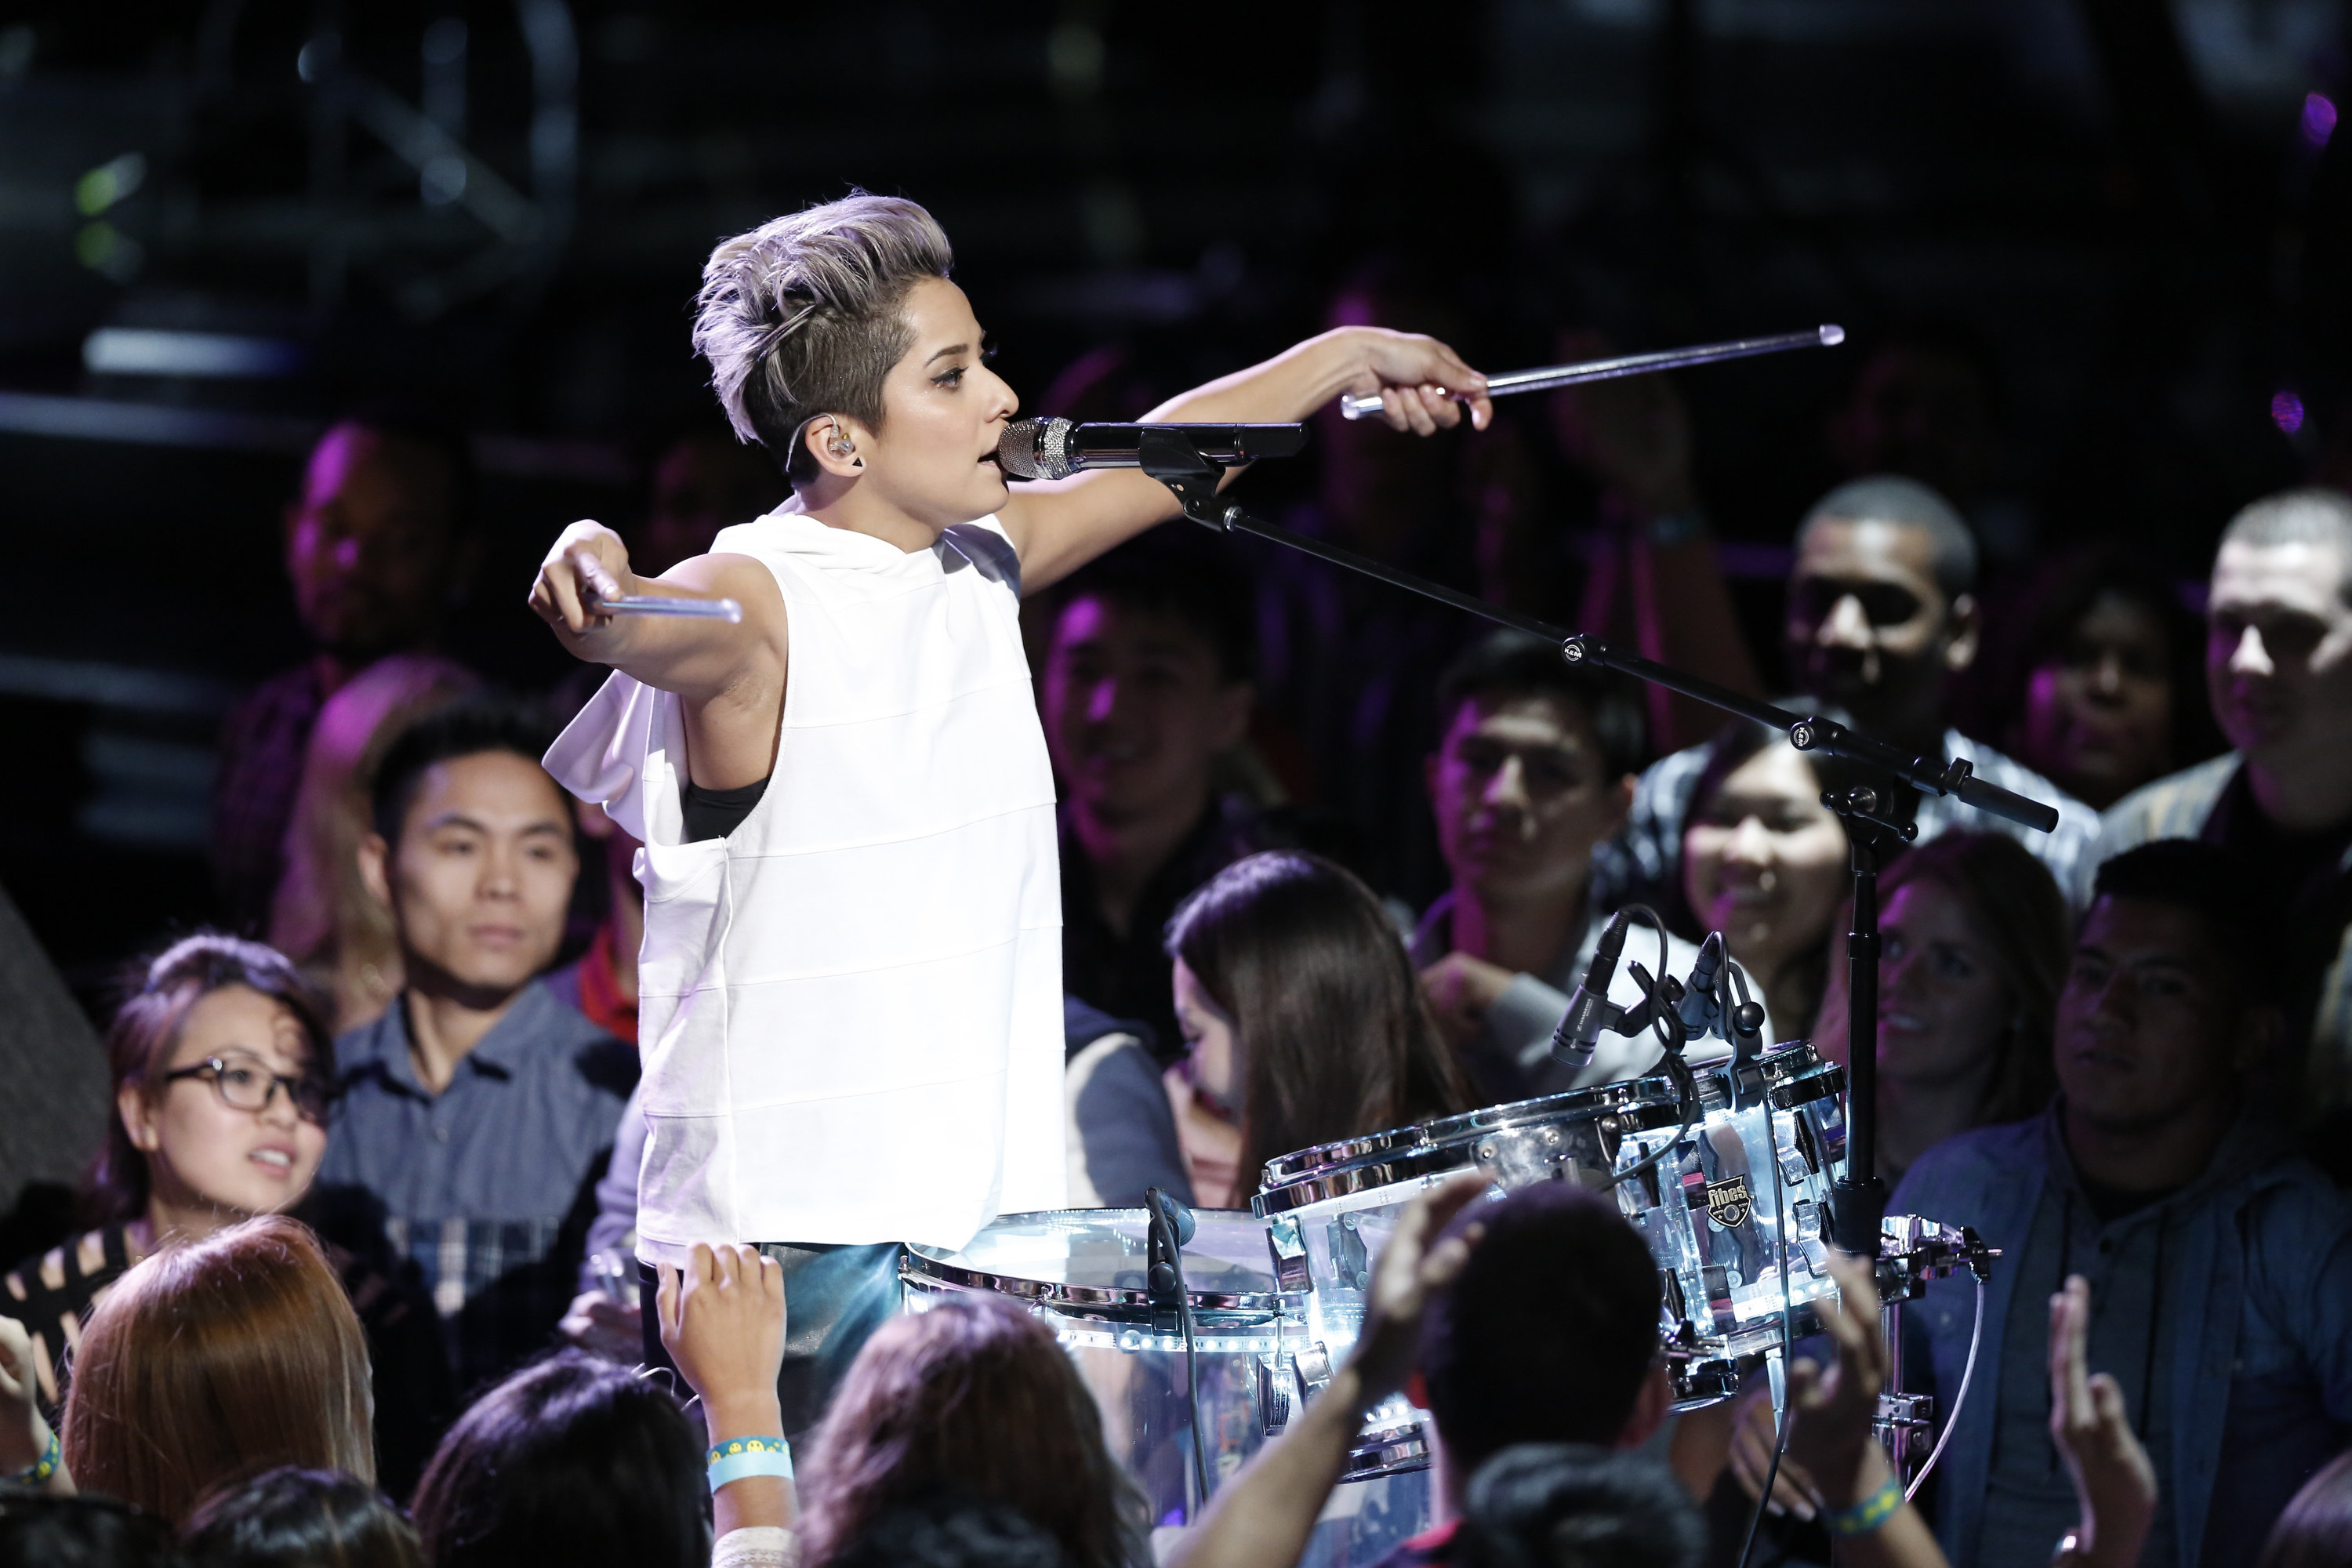 Vicci Martinez singing in front of a crowd